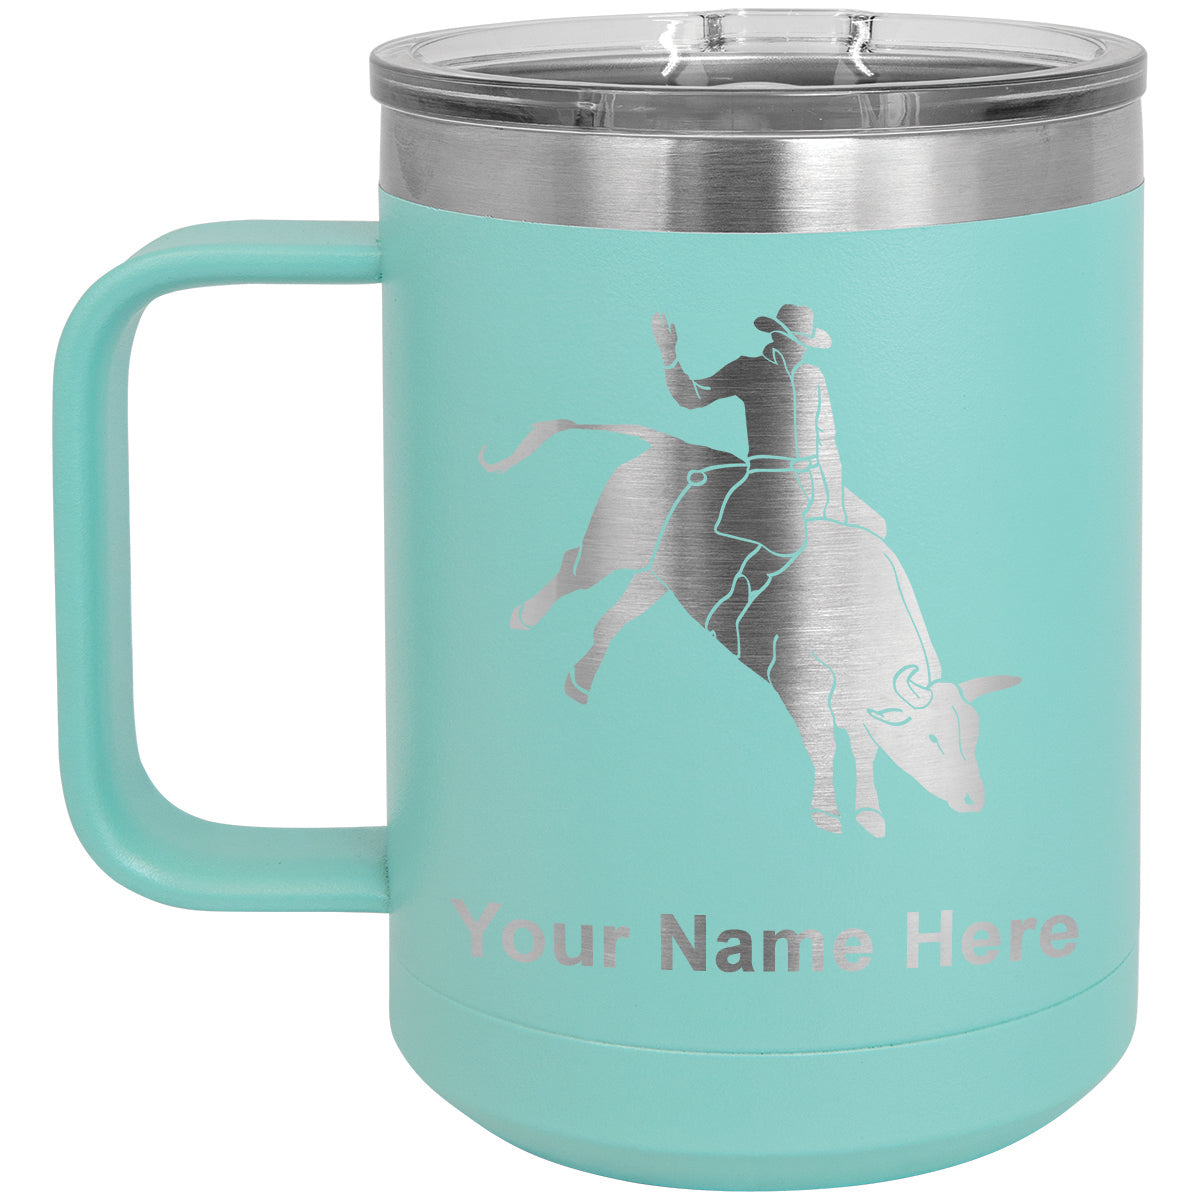 15oz Vacuum Insulated Coffee Mug, Bull Rider Cowboy, Personalized Engraving Included